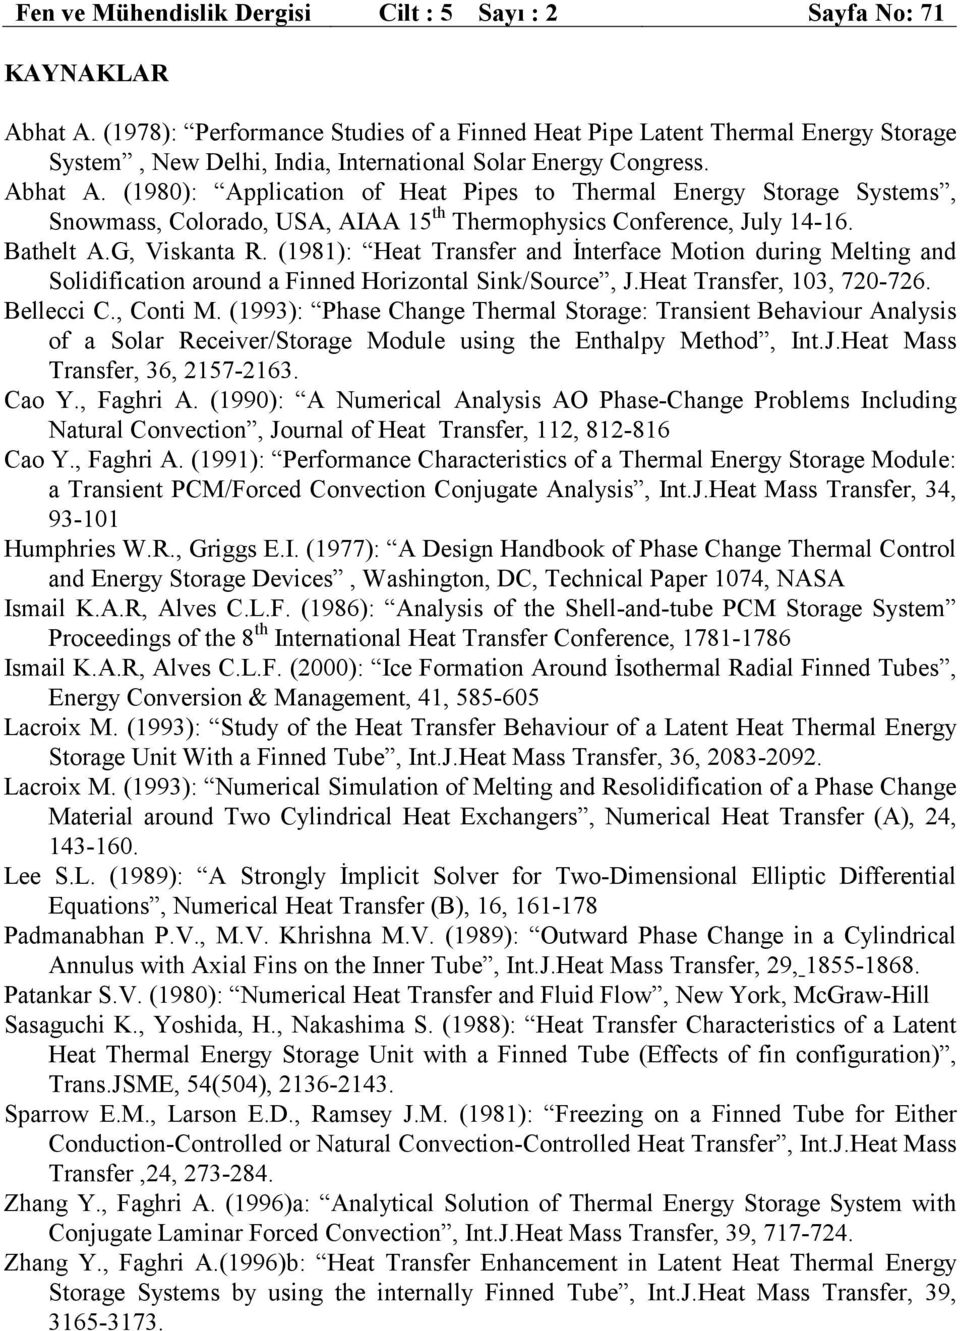 (198: Appication of Heat Pipes to Thera Energy Storage Systes, Snoass, Coorado, USA, AIAA 15 th Therophysics Conference, Juy 14-16. Bathet A.G, Viskanta R.